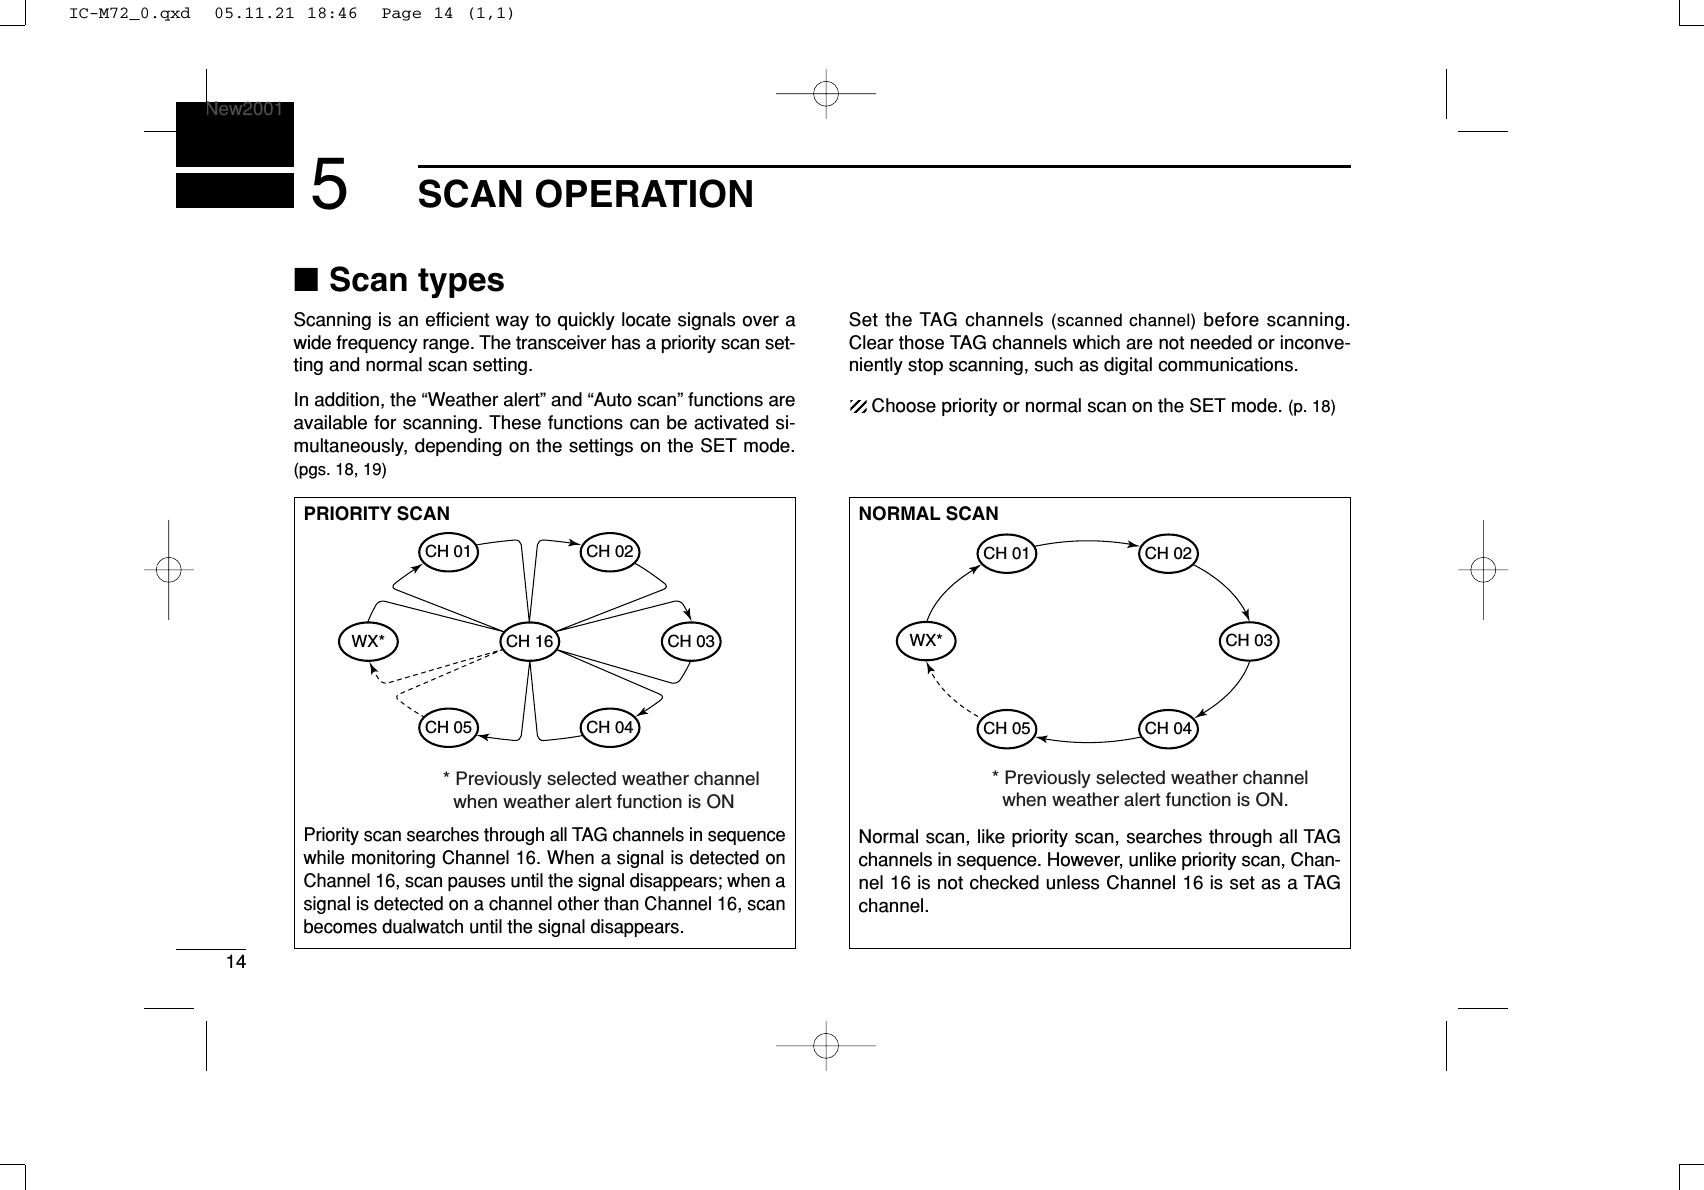 14SCAN OPERATIONNew20015■Scan typesScanning is an efﬁcient way to quickly locate signals over awide frequency range. The transceiver has a priority scan set-ting and normal scan setting.In addition, the “Weather alert” and “Auto scan” functions areavailable for scanning. These functions can be activated si-multaneously, depending on the settings on the SET mode.(pgs. 18, 19)Set the TAG channels (scanned channel) before scanning.Clear those TAG channels which are not needed or inconve-niently stop scanning, such as digital communications.Choose priority or normal scan on the SET mode. (p. 18)PRIORITY SCANPriority scan searches through all TAG channels in sequencewhile monitoring Channel 16. When a signal is detected onChannel 16, scan pauses until the signal disappears; when asignal is detected on a channel other than Channel 16, scanbecomes dualwatch until the signal disappears.WX*CH 01CH 16CH 02CH 05 CH 04CH 03* Previously selected weather channel   when weather alert function is ONNORMAL SCANNormal scan, like priority scan, searches through all TAGchannels in sequence. However, unlike priority scan, Chan-nel 16 is not checked unless Channel 16 is set as a TAGchannel.CH 01 CH 02WX*CH 05 CH 04CH 03* Previously selected weather channel   when weather alert function is ON.IC-M72_0.qxd  05.11.21 18:46  Page 14 (1,1)